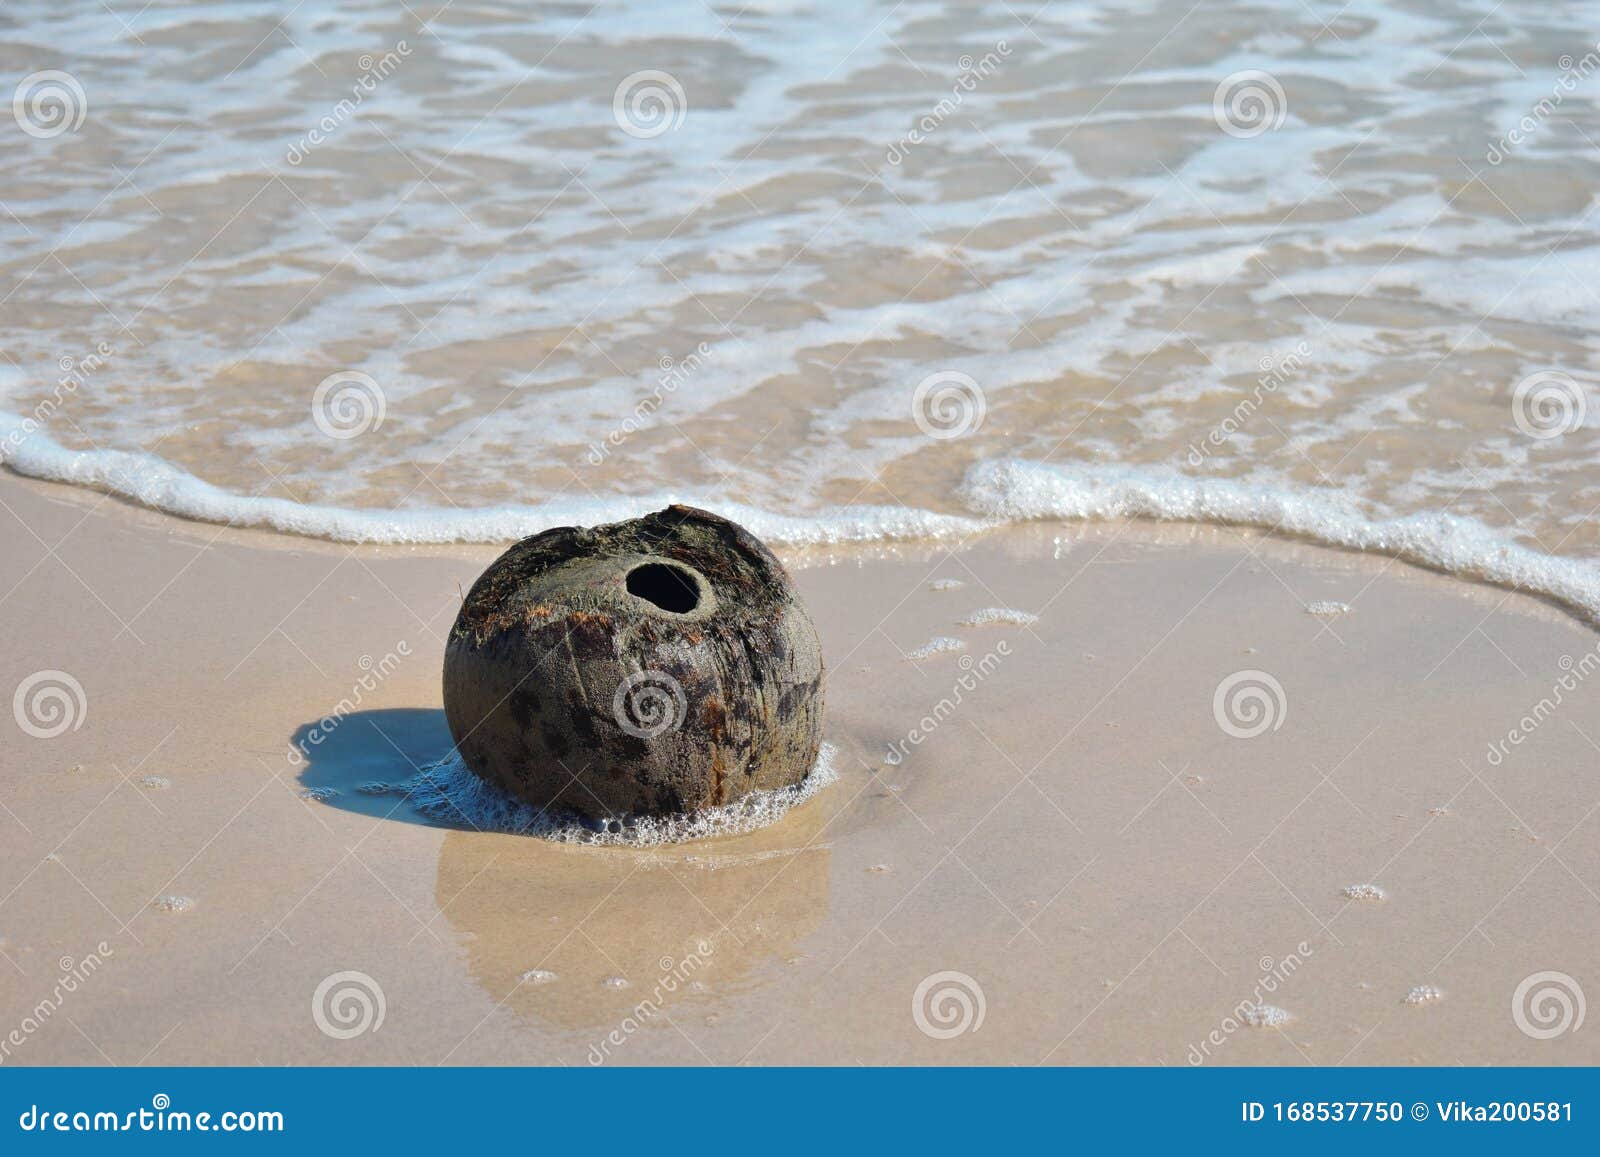 Old Coconut Floats in Water. the Bark of the Coconut in the Sea. Brown ...